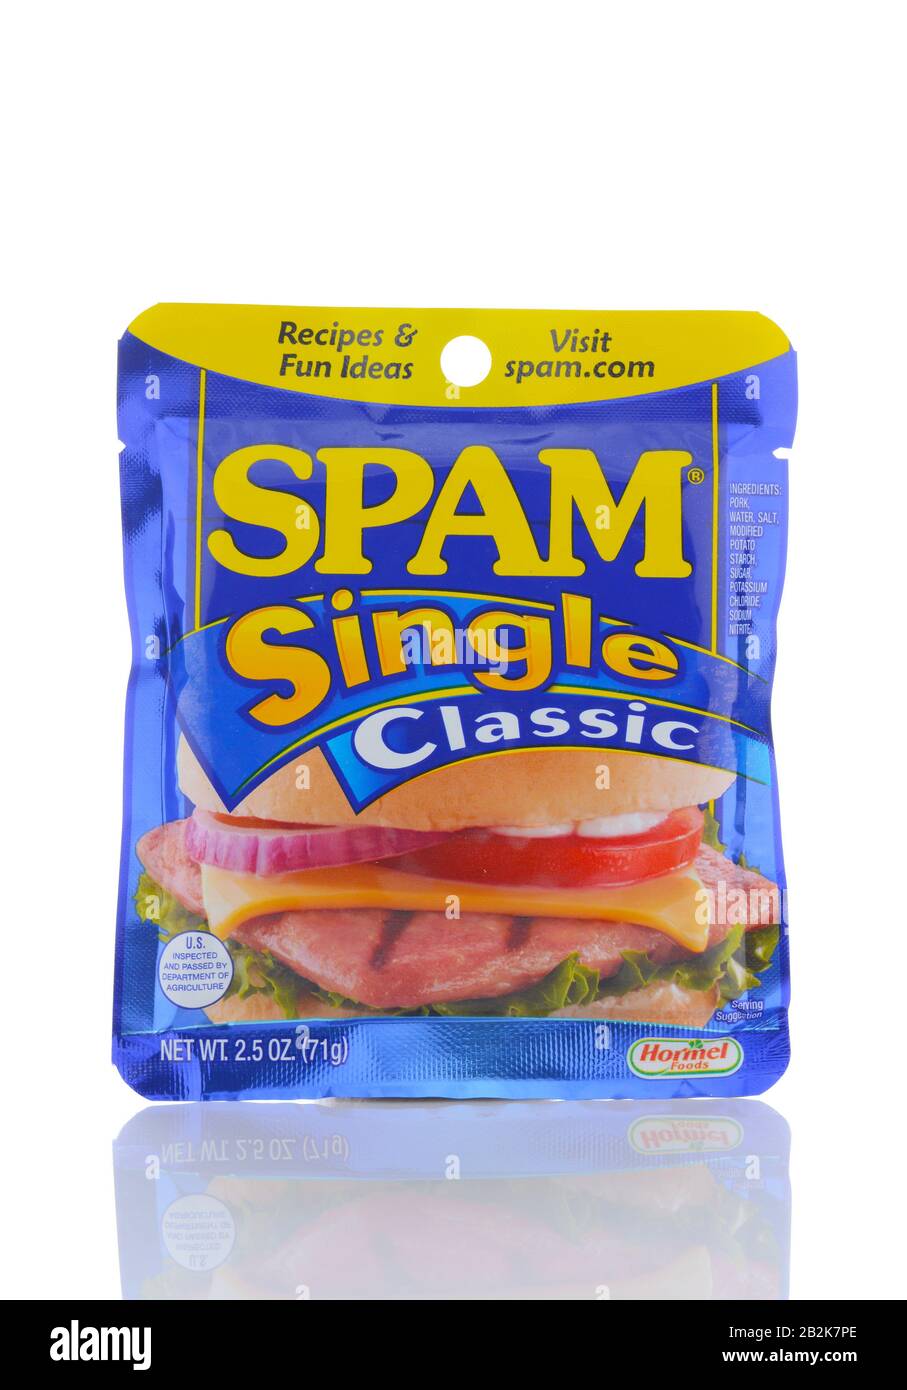 IRVINE, CALIF - SEPT 12, 2018: Spam Singles. A single serving package of the popular spiced ham product. Stock Photo